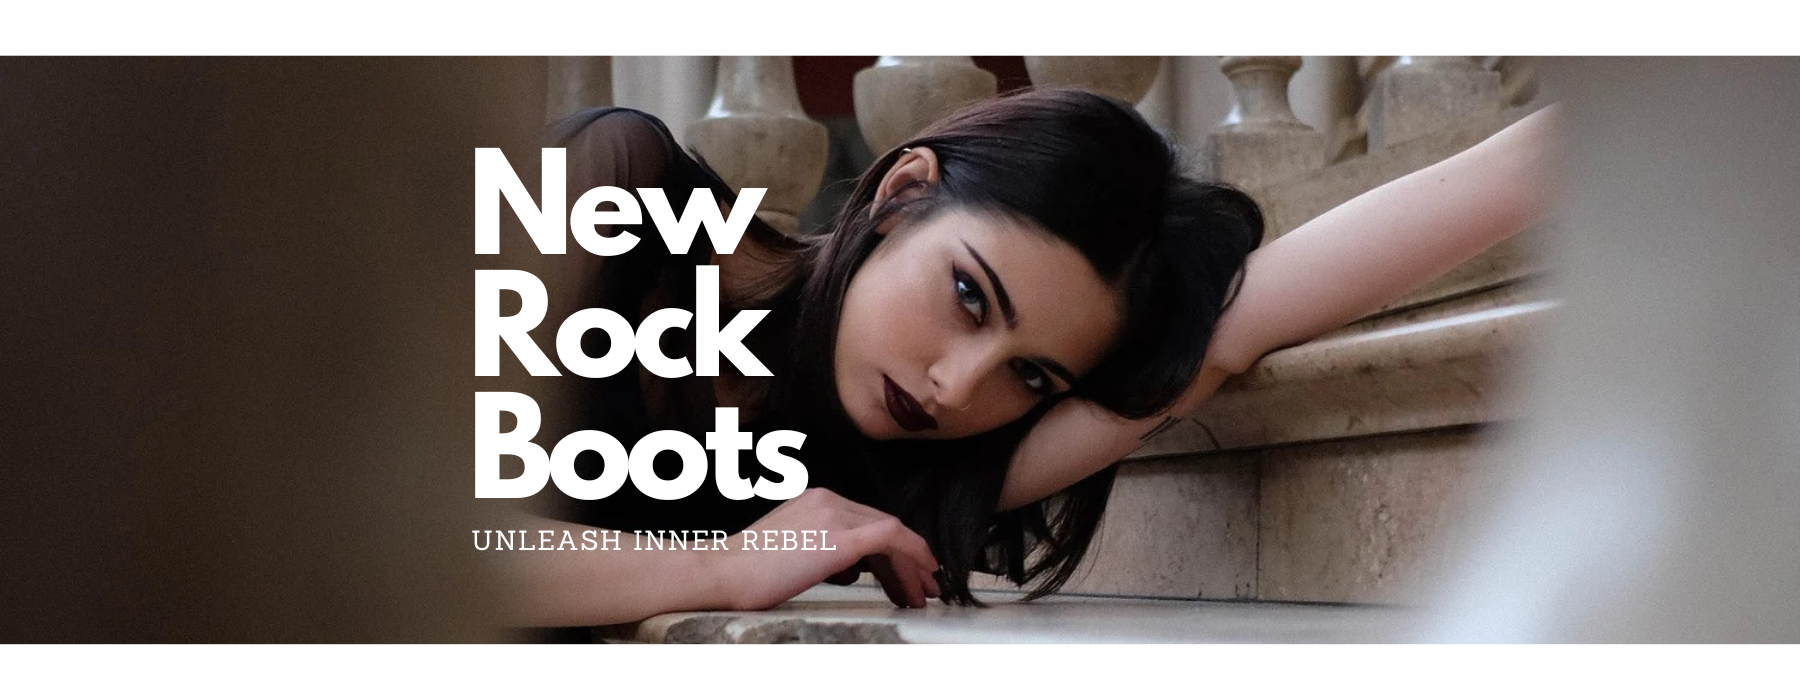 Rockin' Around the Christmas Tree: Unleashing Your Inner Rebel with New Rock Boots